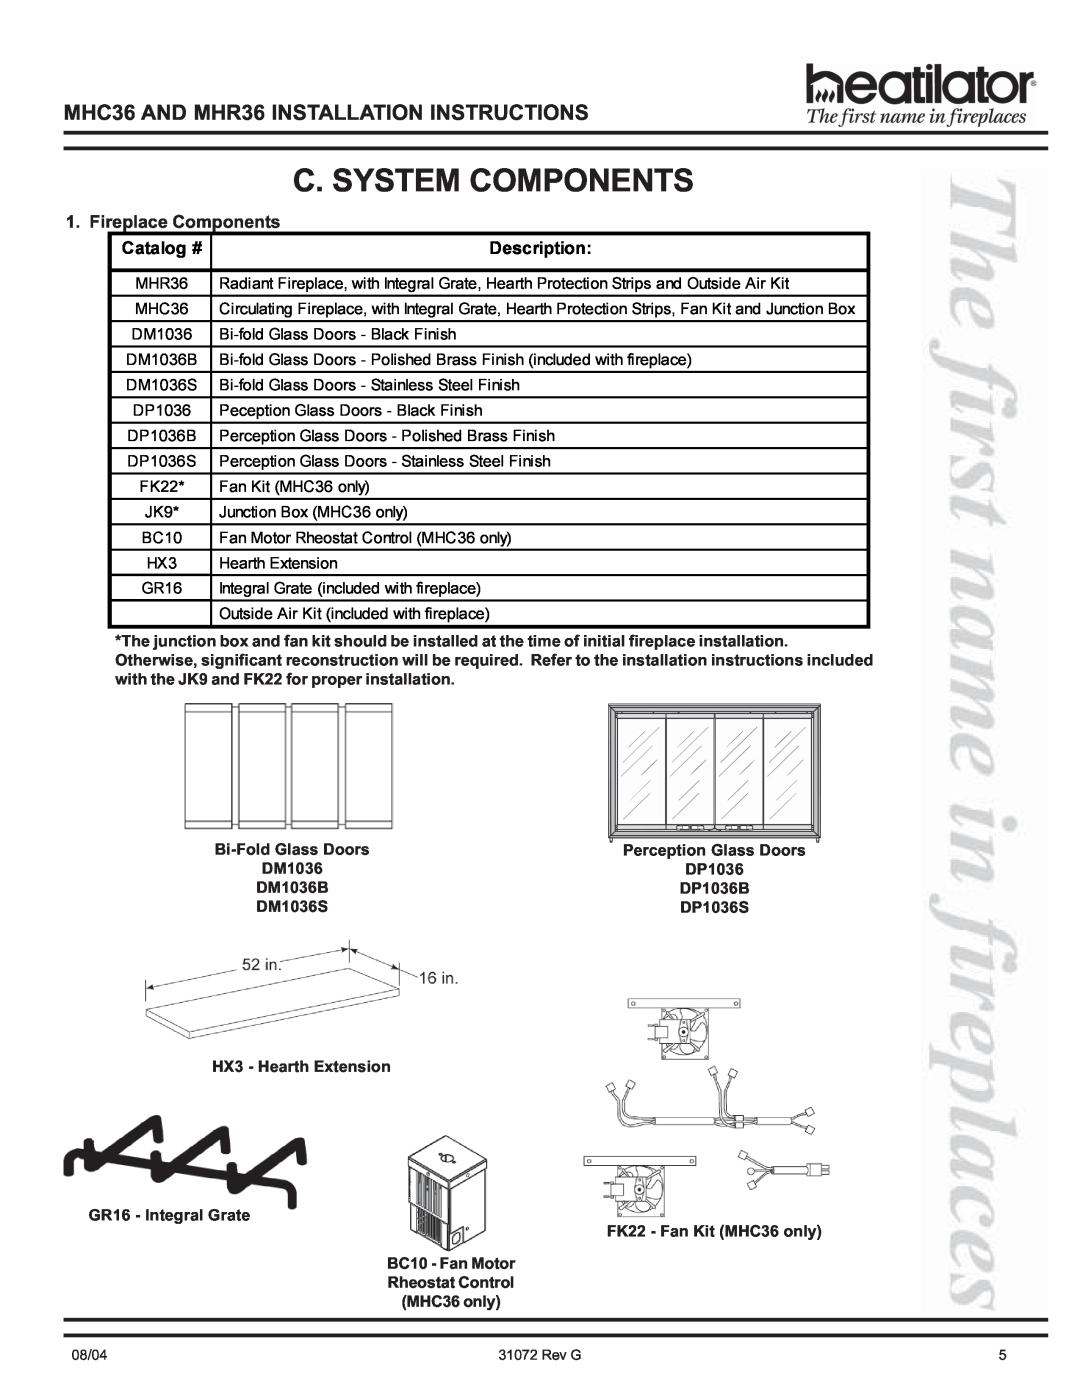 Heart & Home Collectables MHR36, MHC36 manual C. System Components, Fireplace Components, Catalog #, Description 